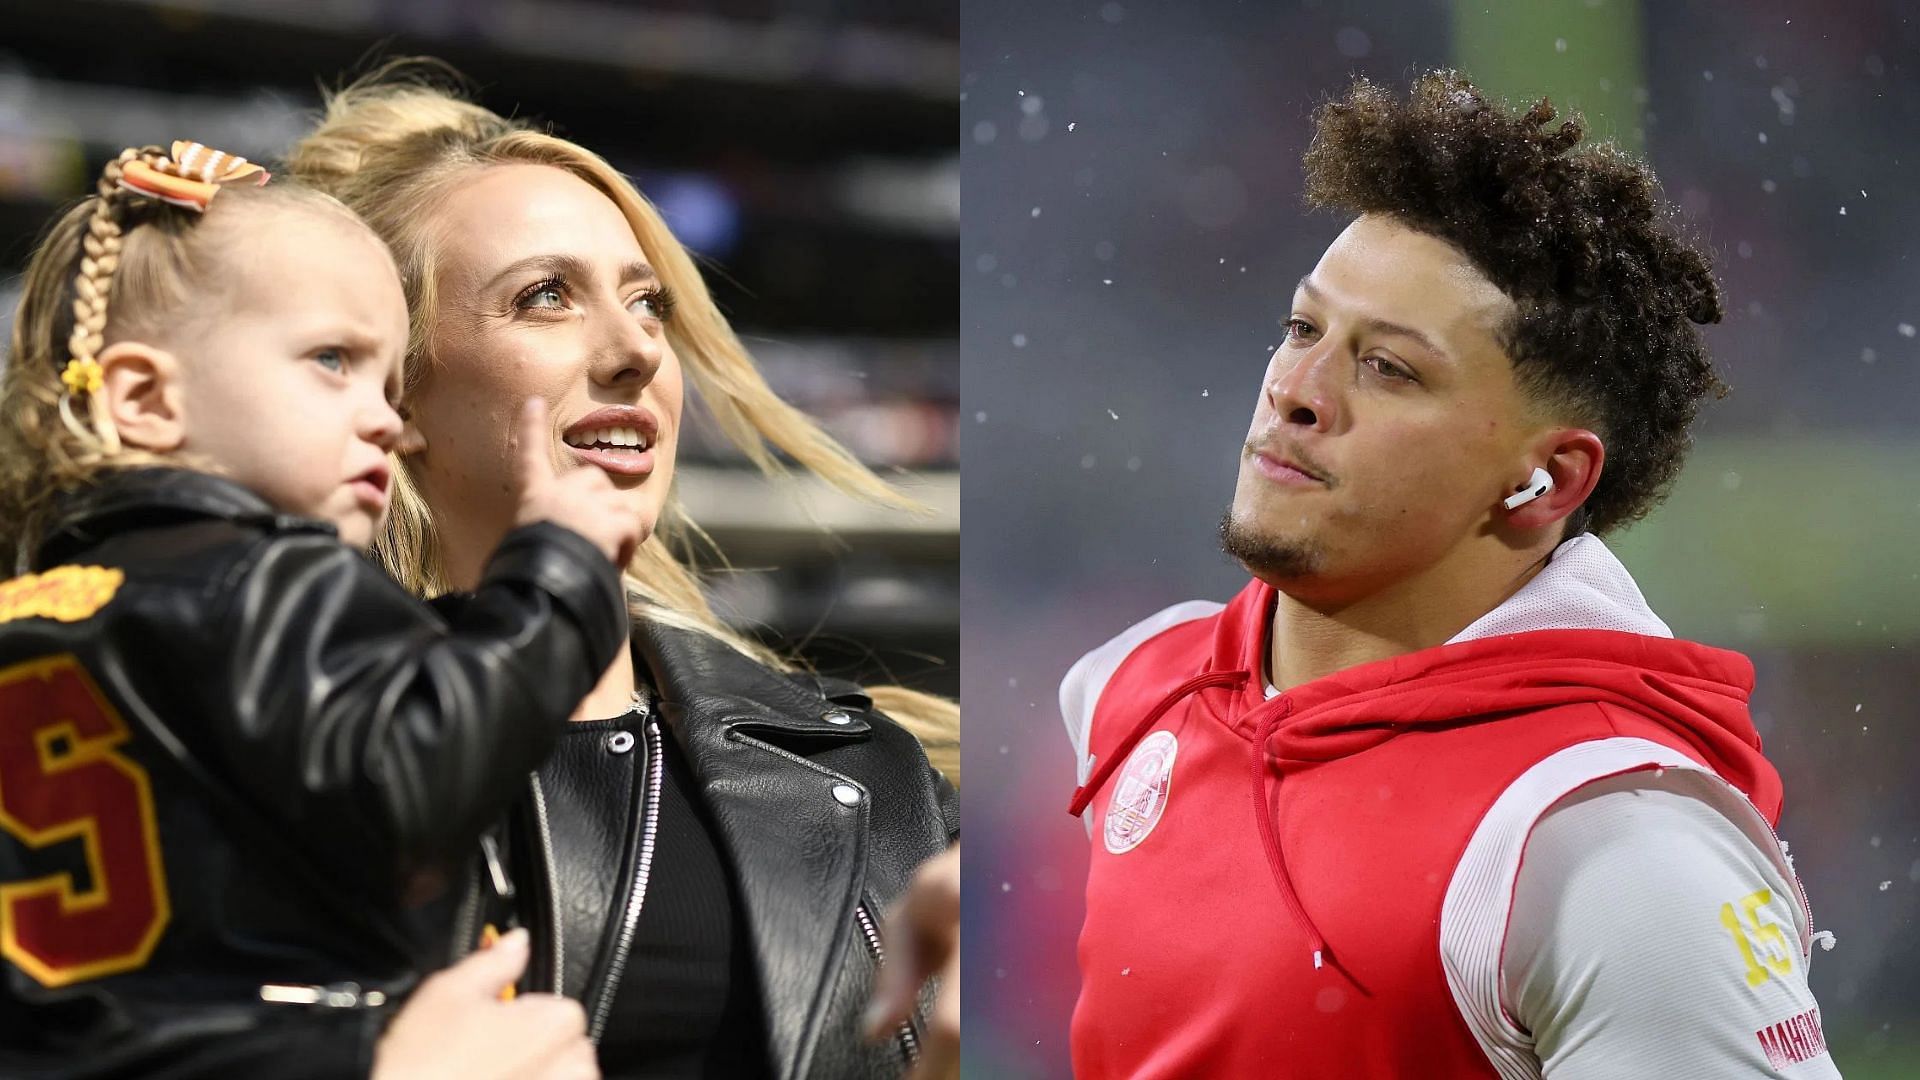 Patrick Mahomes gets a supportive message from his wife Brittany